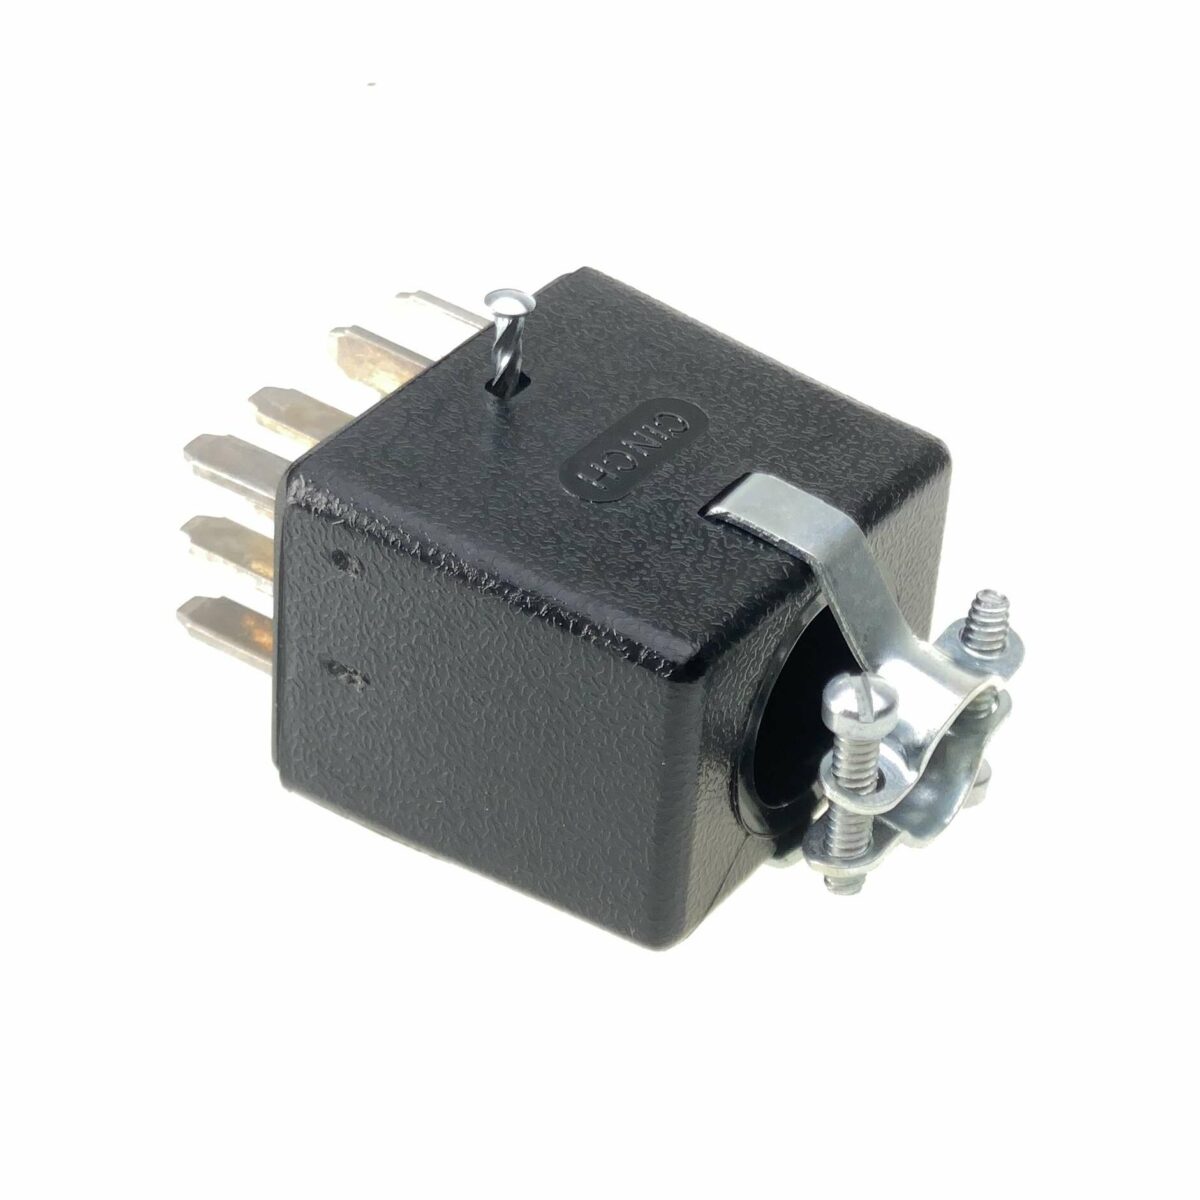 DBX 165, 165A Stereo Link Connector